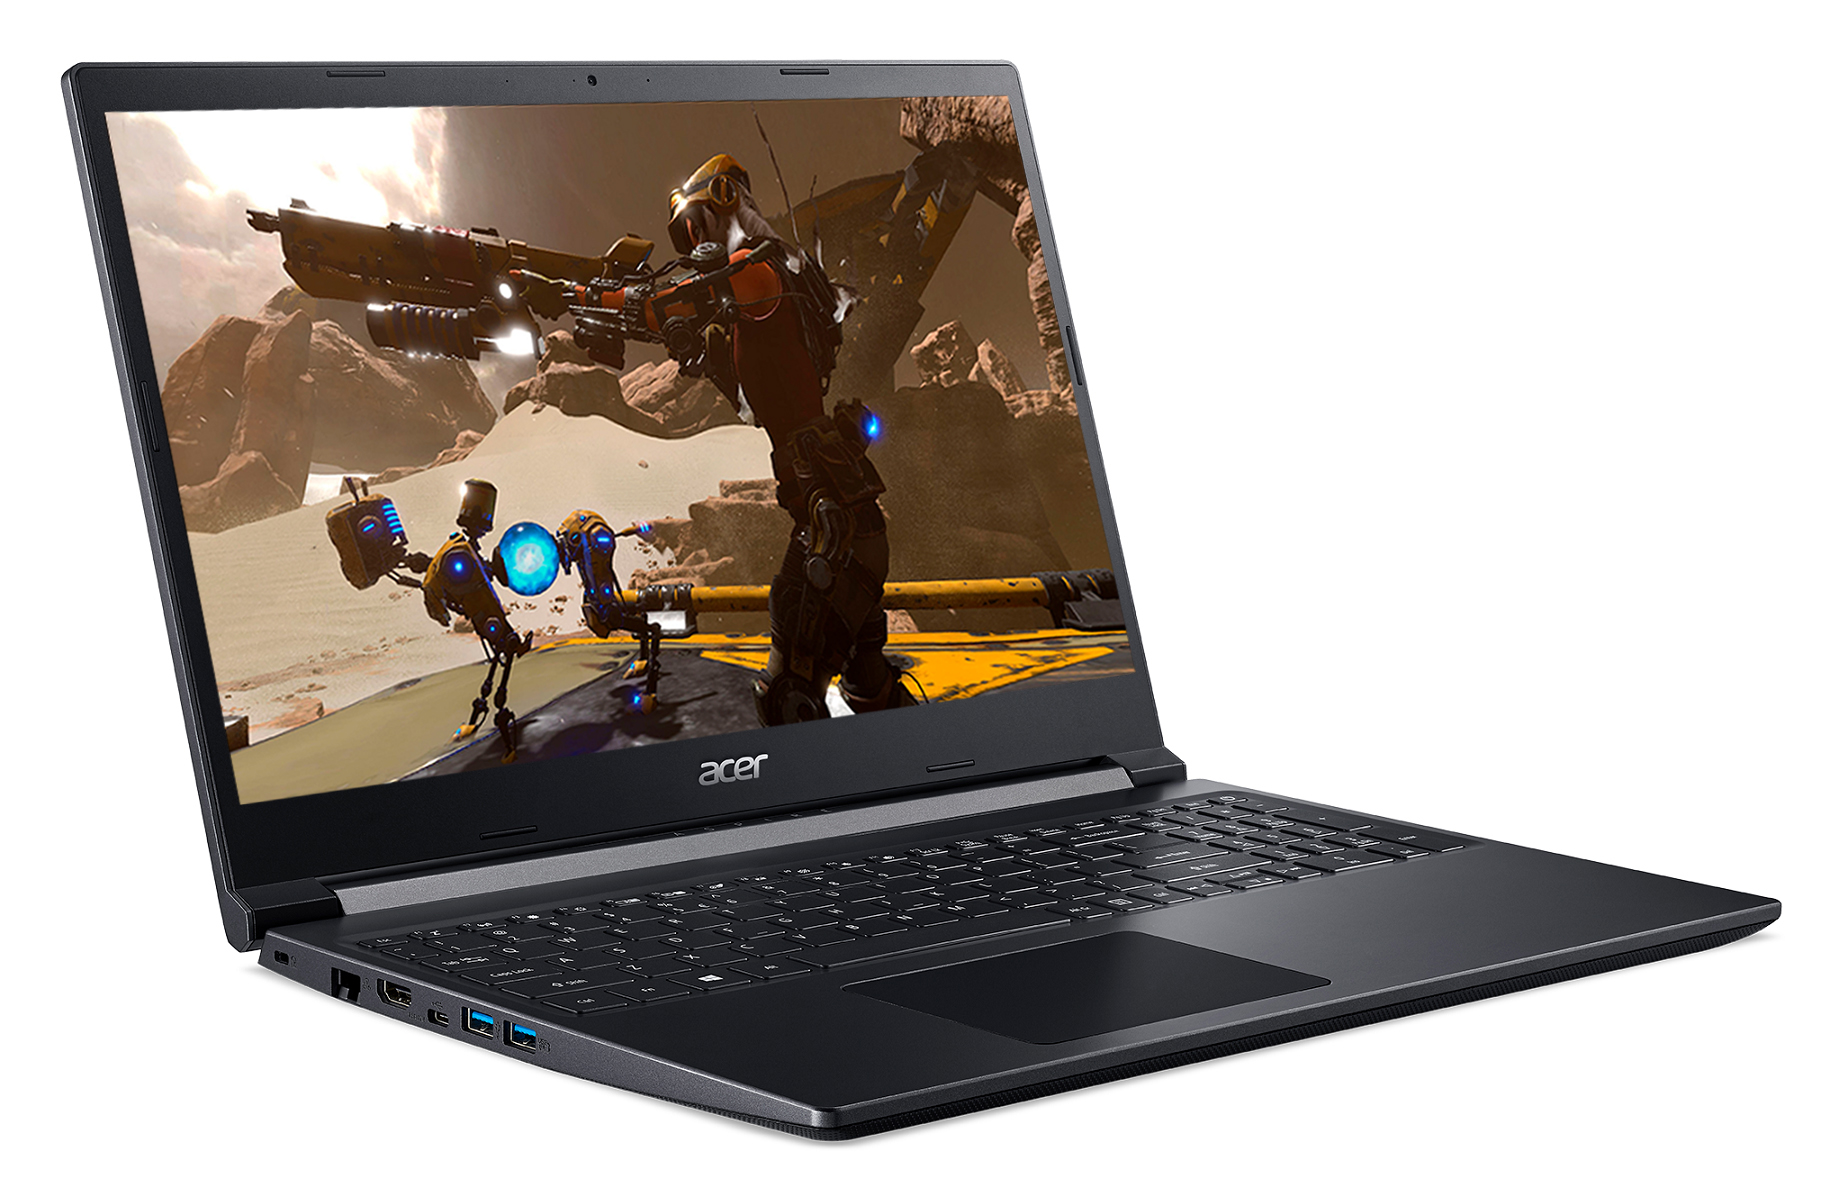 Acer launches Acer Aspire 7 gaming laptop decoding=